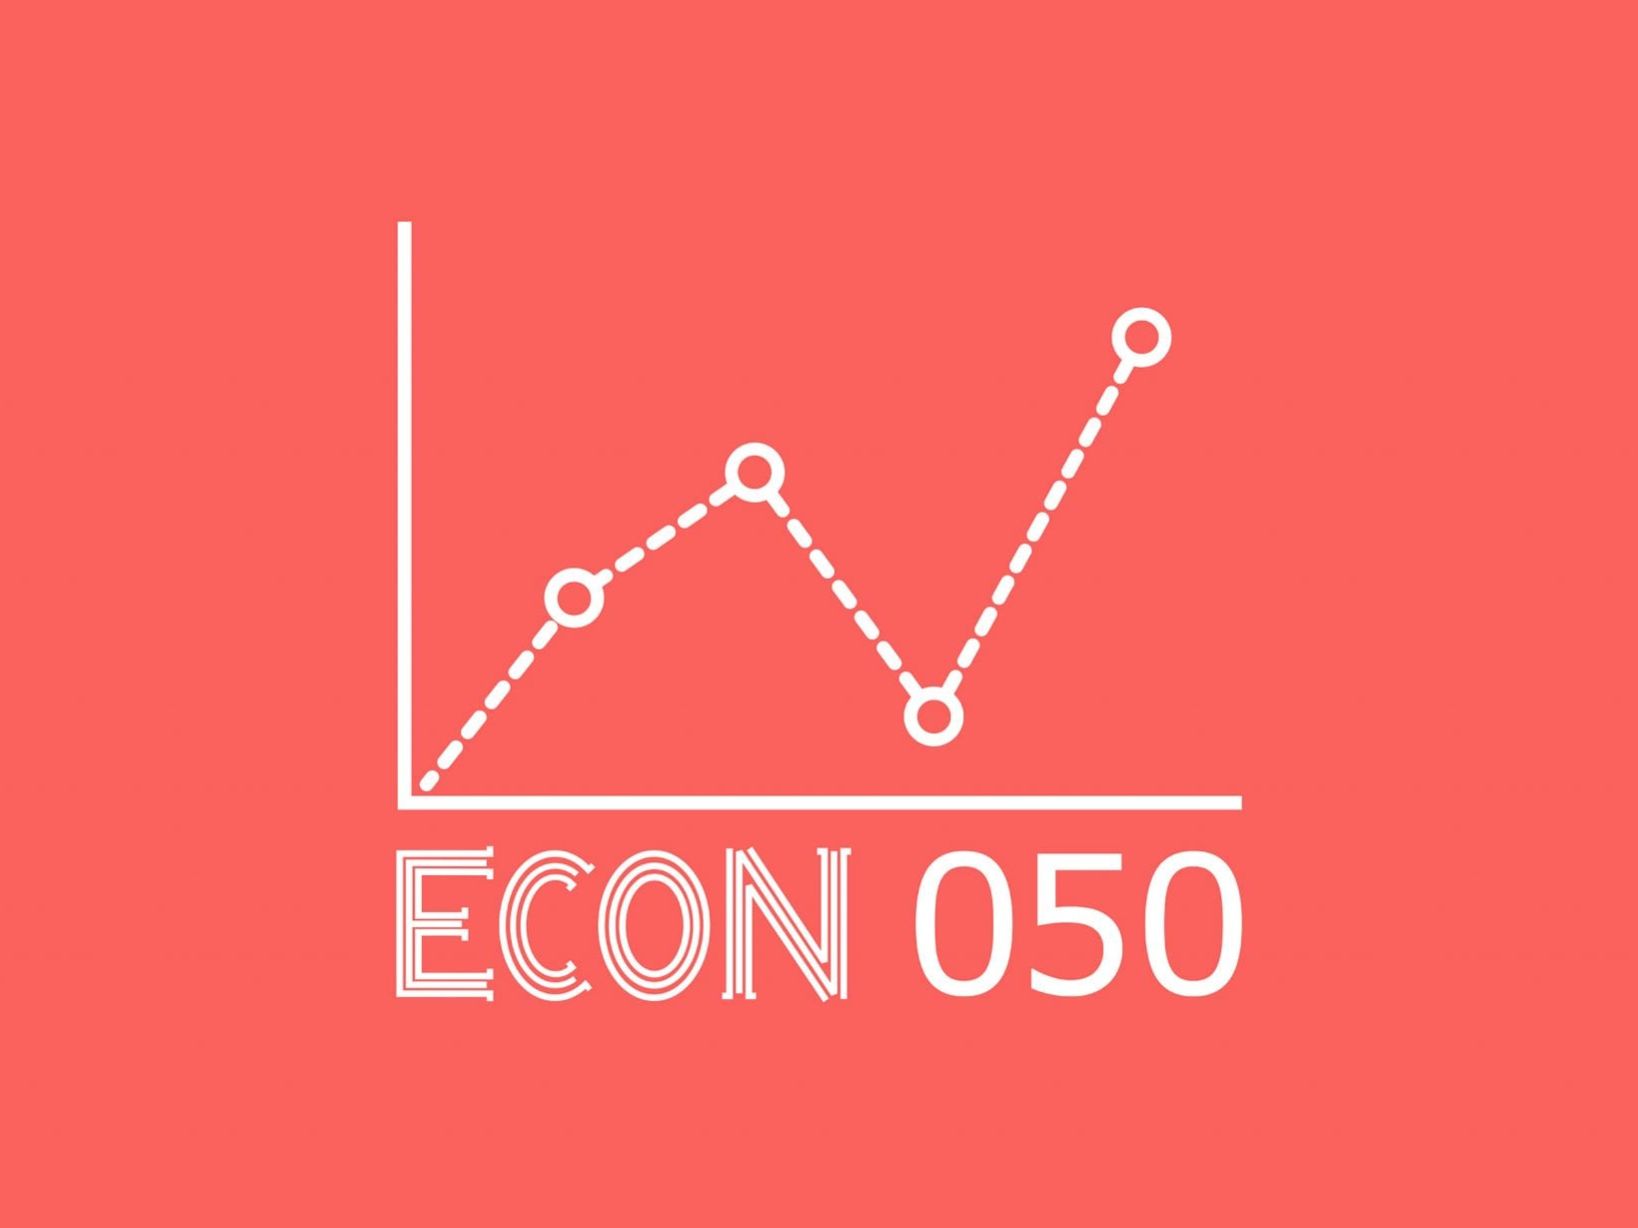 Econ 050 is a podcast on economics and business made by the Faculty of Economics and Business in collaboration with the Northern Times.